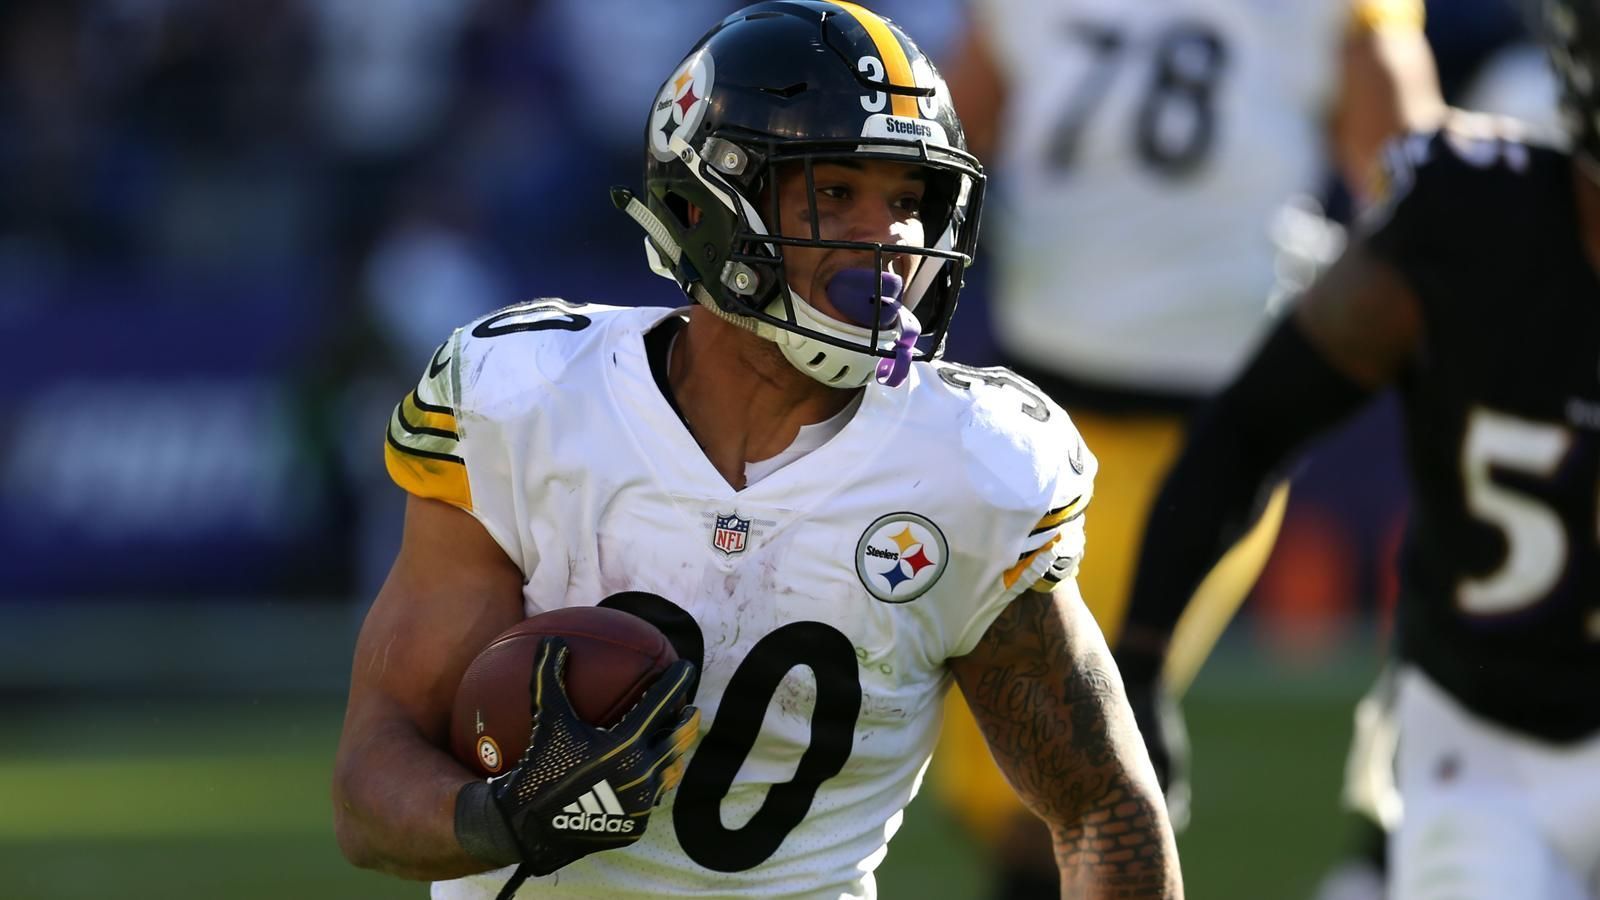 
                <strong> Woche 8</strong><br>
                AFC Offensive Player of the Week: James Conner (Running Back - Pittsburgh Steelers) im BildAFC Defensive Player of the Week: Dee Ford (Defensive End - Kansas City Chiefs)AFC Special Team Player of the Week: Adam Vinatieri (Kicker - Indianapolis Colts)NFC Offensive Player of the Week: Adrian Peterson (Running Back - Washington Redskins)NFC Defensive Player of the Week: P.J. Williams (Cornerback - New Orleans Saints)NFC Special Team Player of the Week: Michael Dickson (Punter - Seattle Seahawks)Rookie of the Week: Darius Leonard (Linebacker - Indianapolis Colts)
              